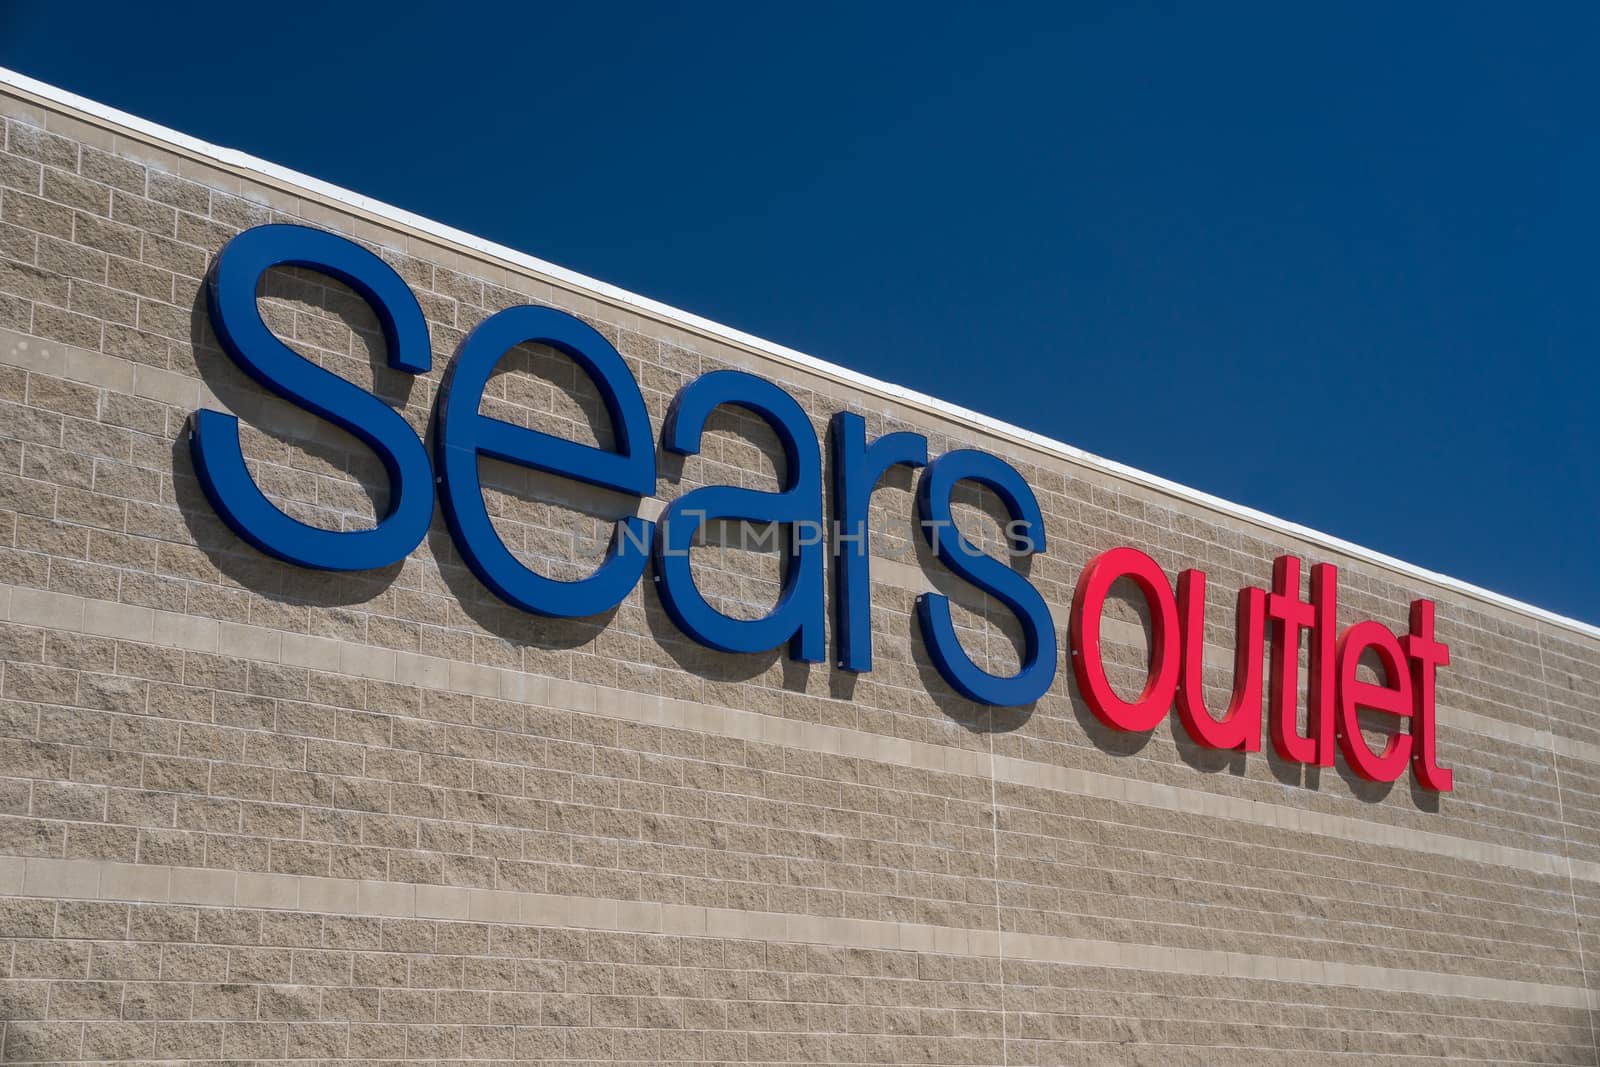 PALMDALE, CA/USA - APRIL 23, 2016: Sears Outlet exterior sign. Sears is an American department store chain and fourth largest U.S. department store company by retail sales.